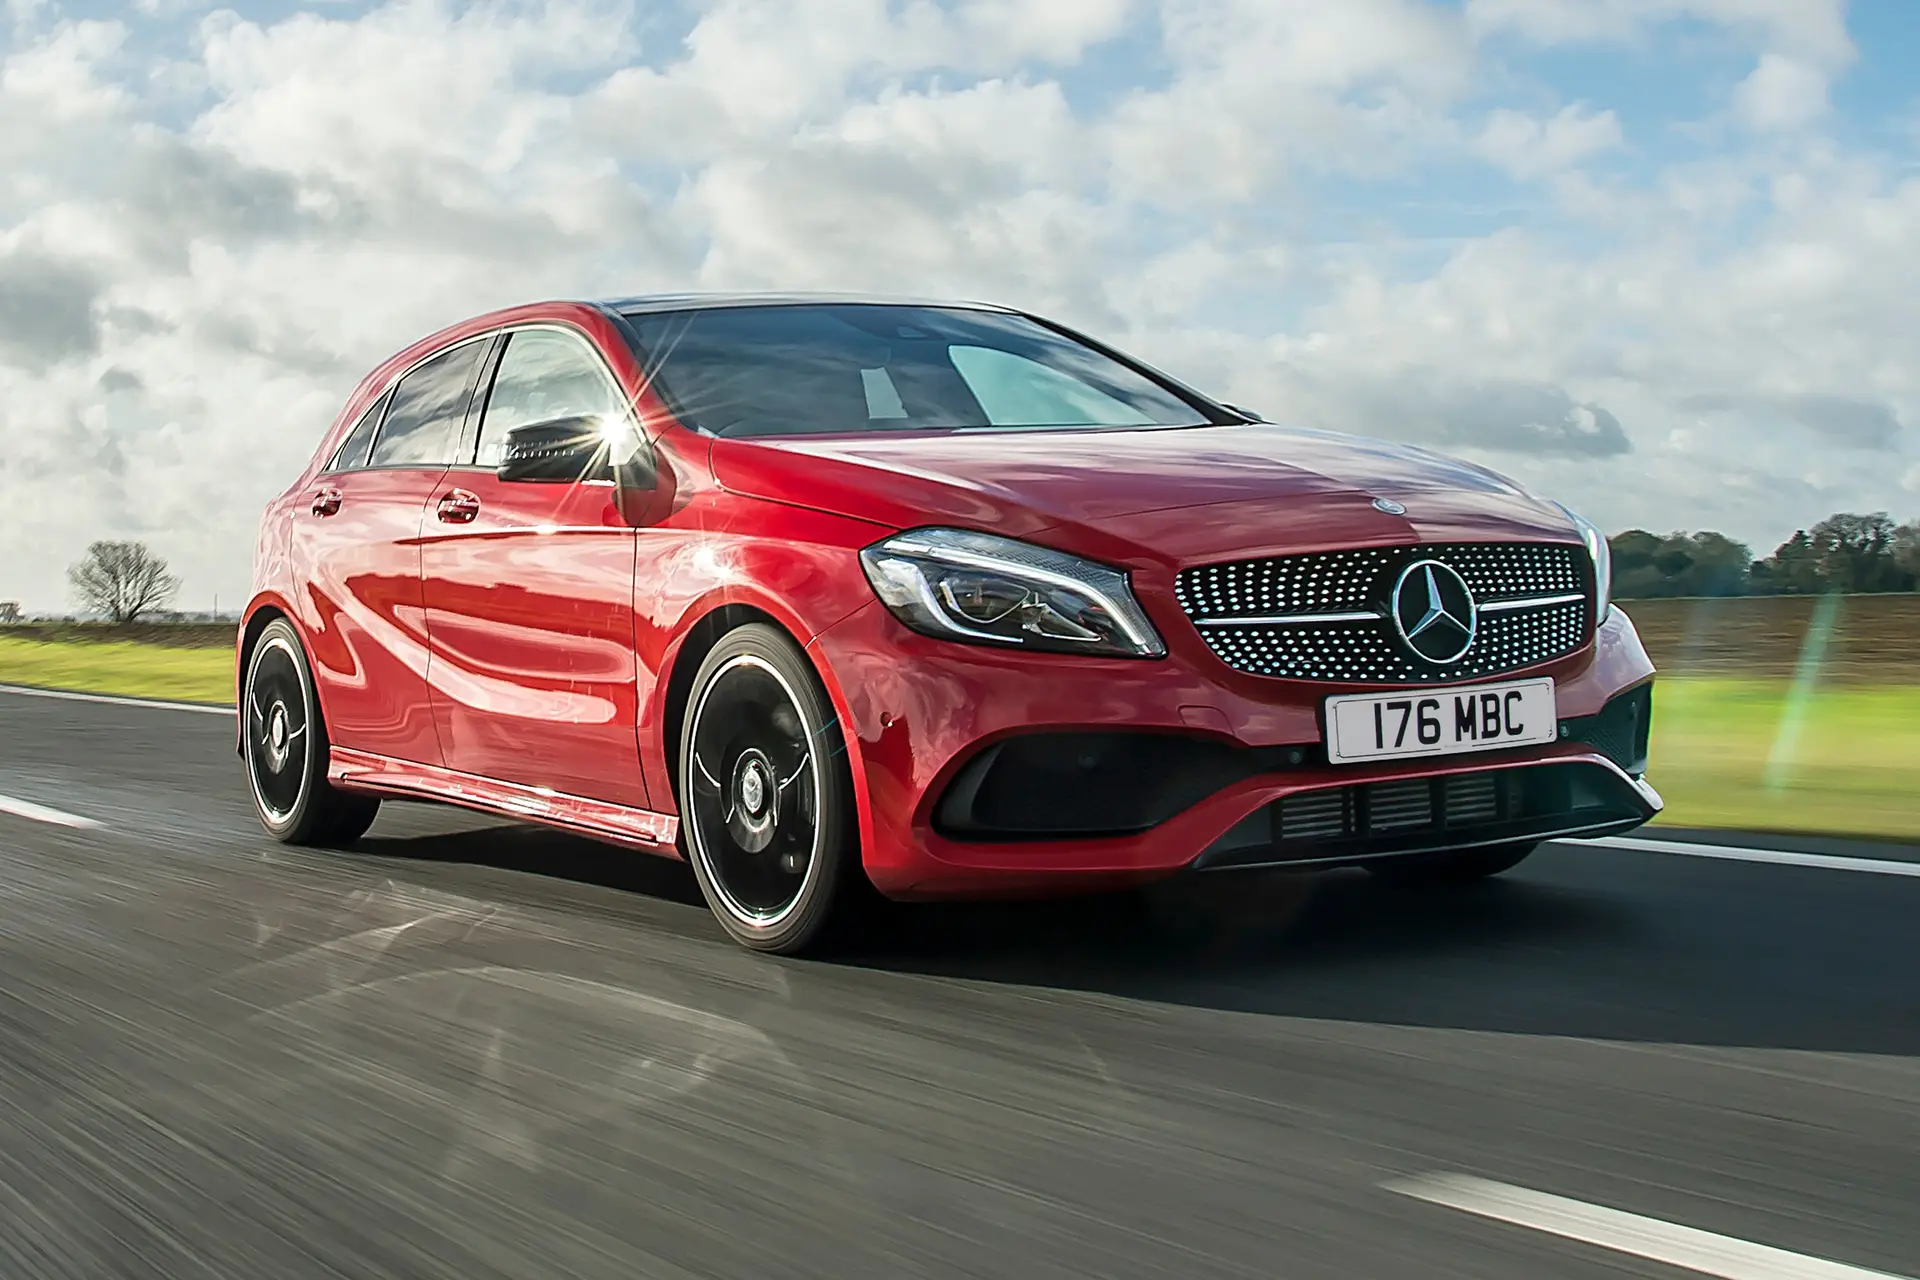 Mercedes A-Class (2012-2018) Review: Exterior front three quarter photo of the Mercedes-Benz A-Class on the road